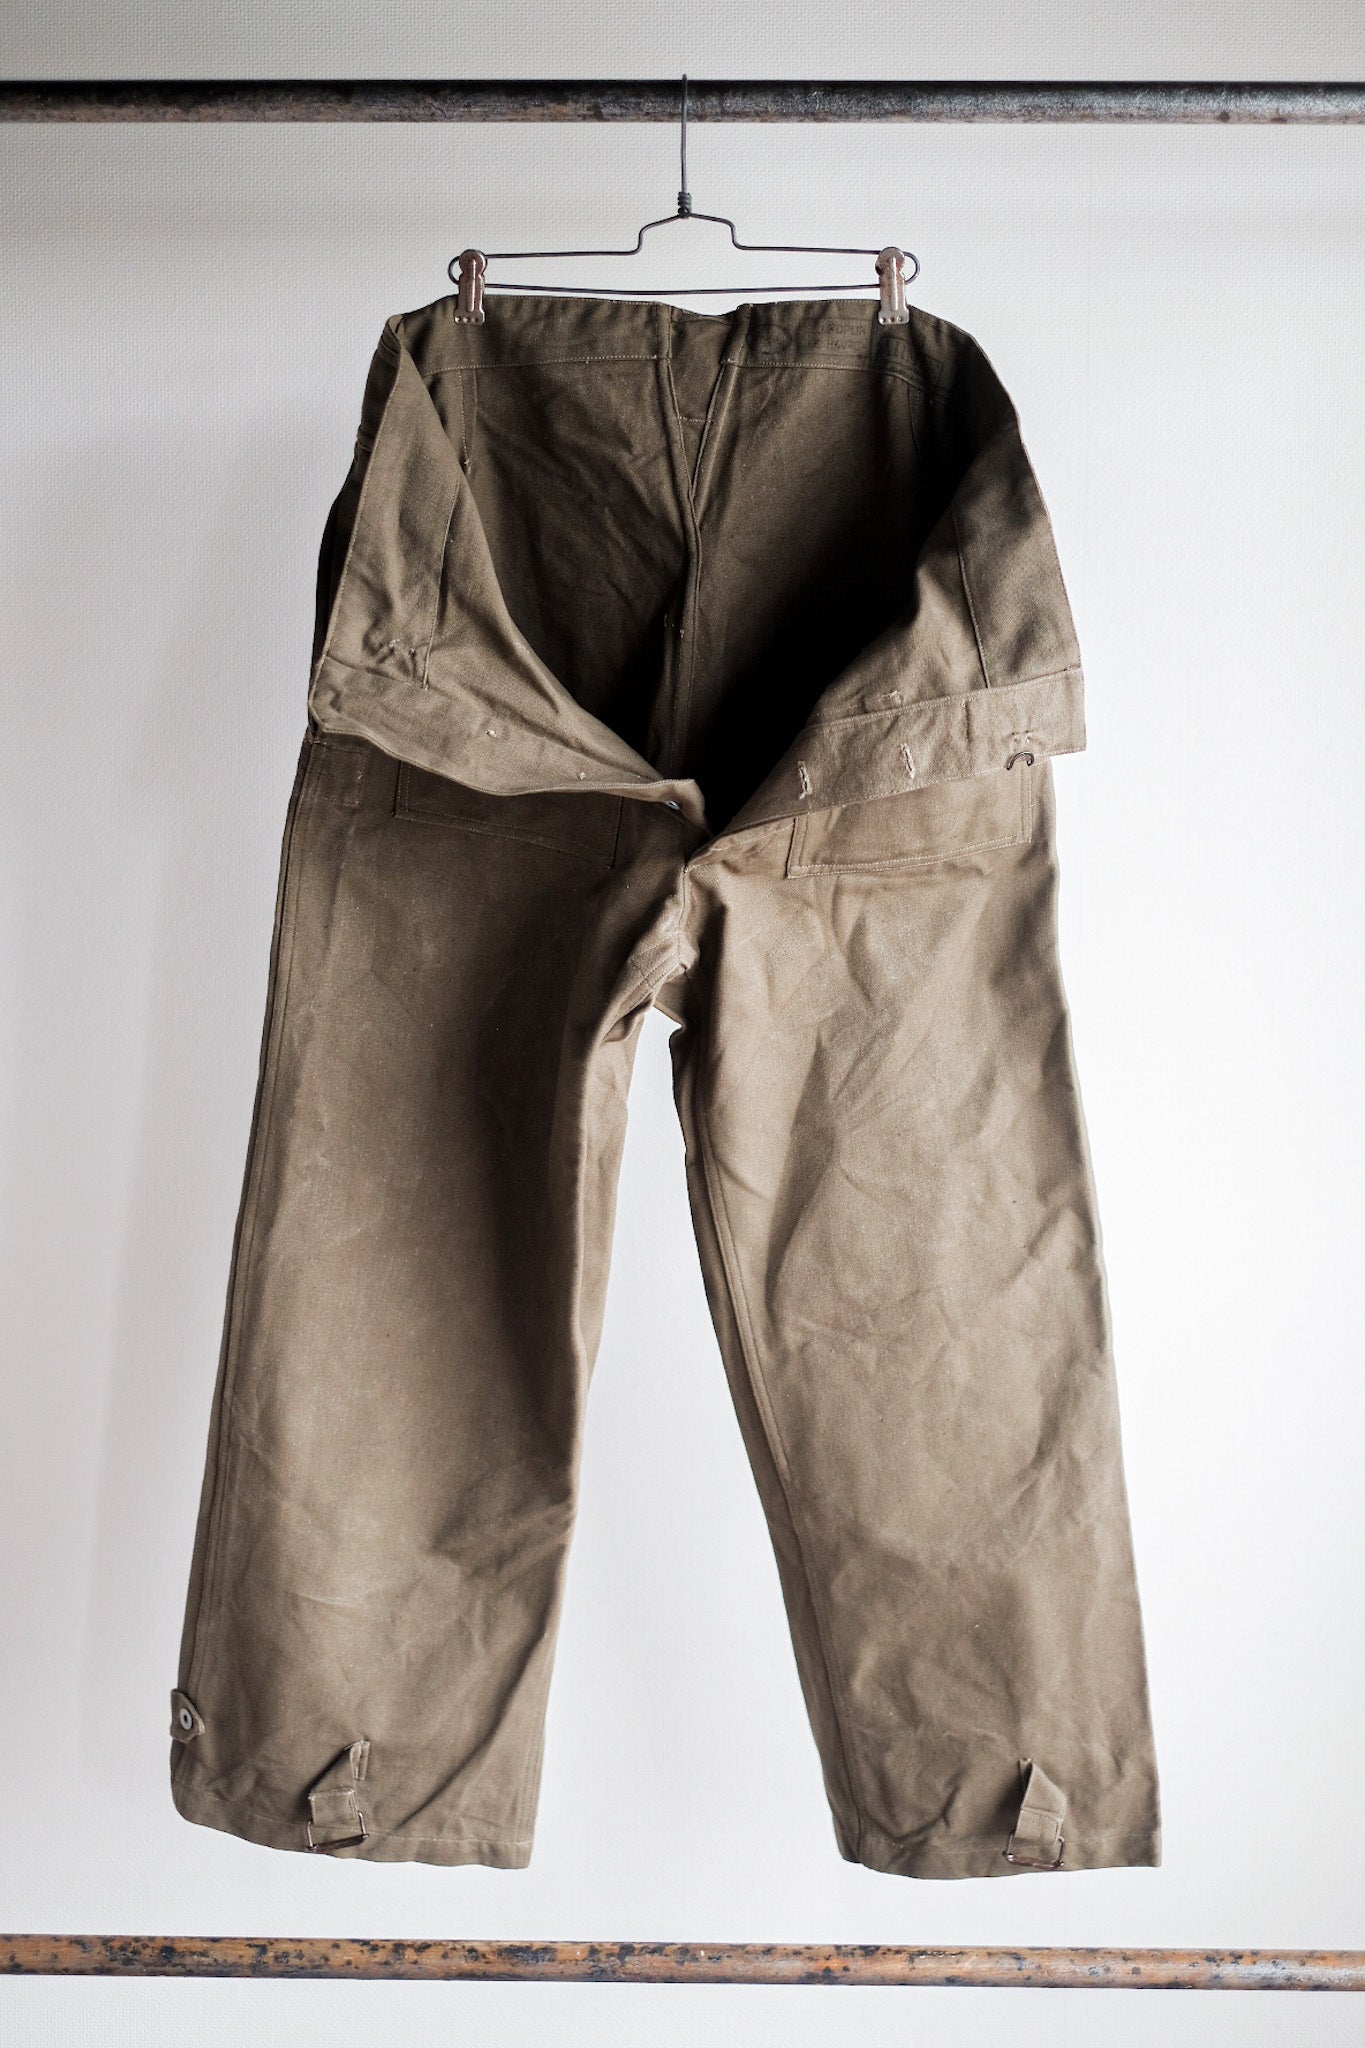 [~ 30's] French Army M35 Motorcycle Pants "Cotton Linen Type" "Dead Stock"